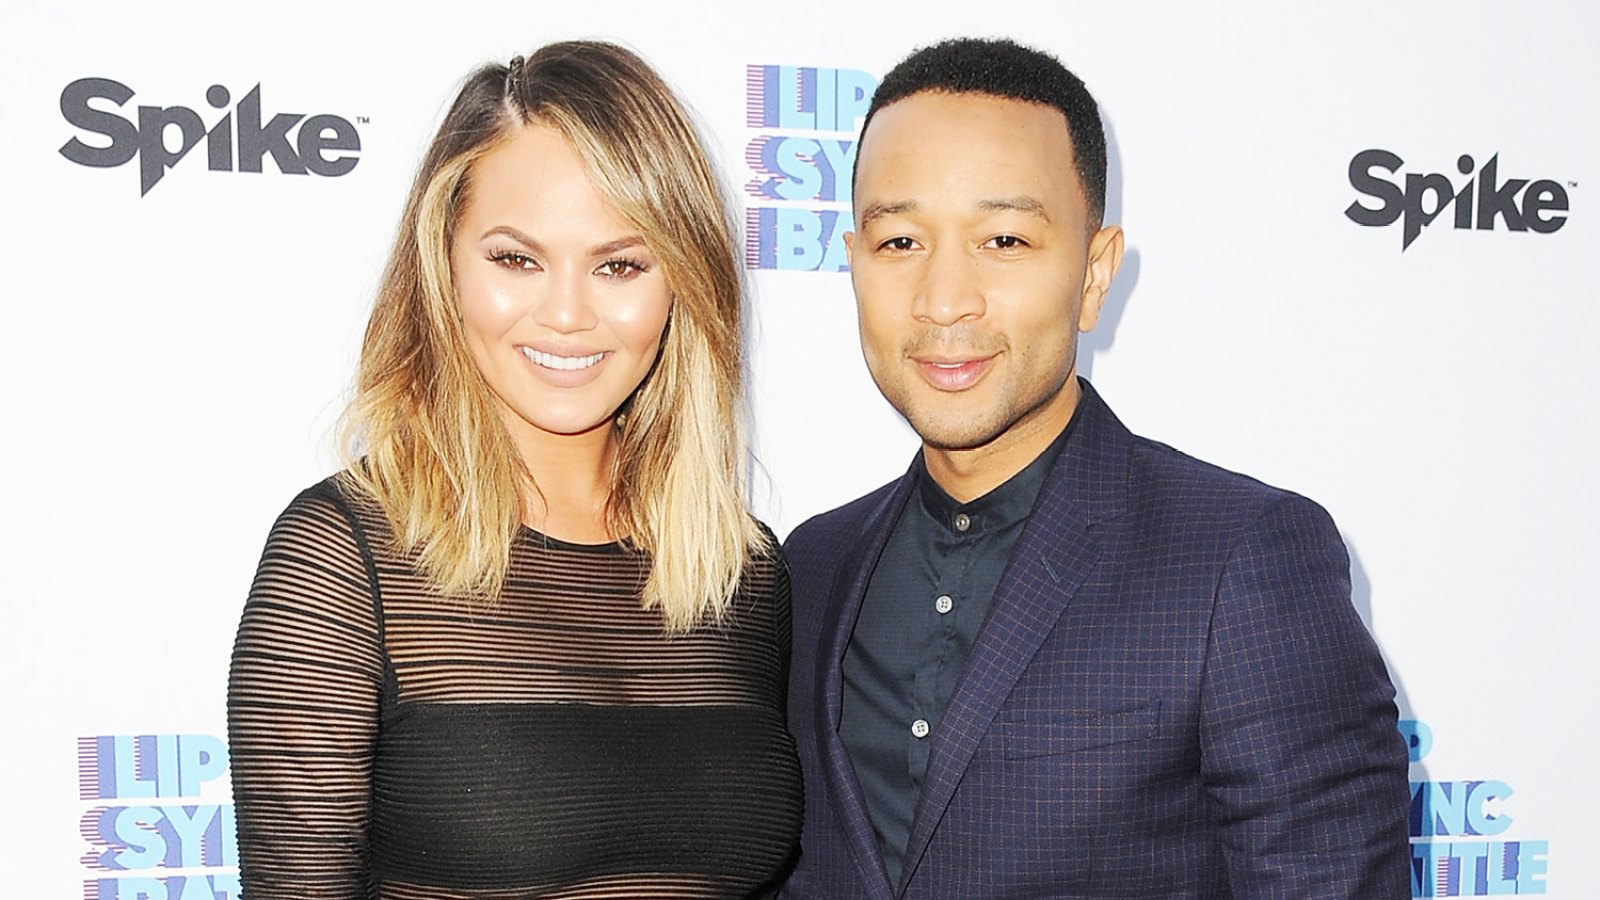 Chrissy Teigen and John Legend arrive at the FYC Event, Spike's 'Lip Sync Battle,' on June 14, 2016, in North Hollywood, CA.